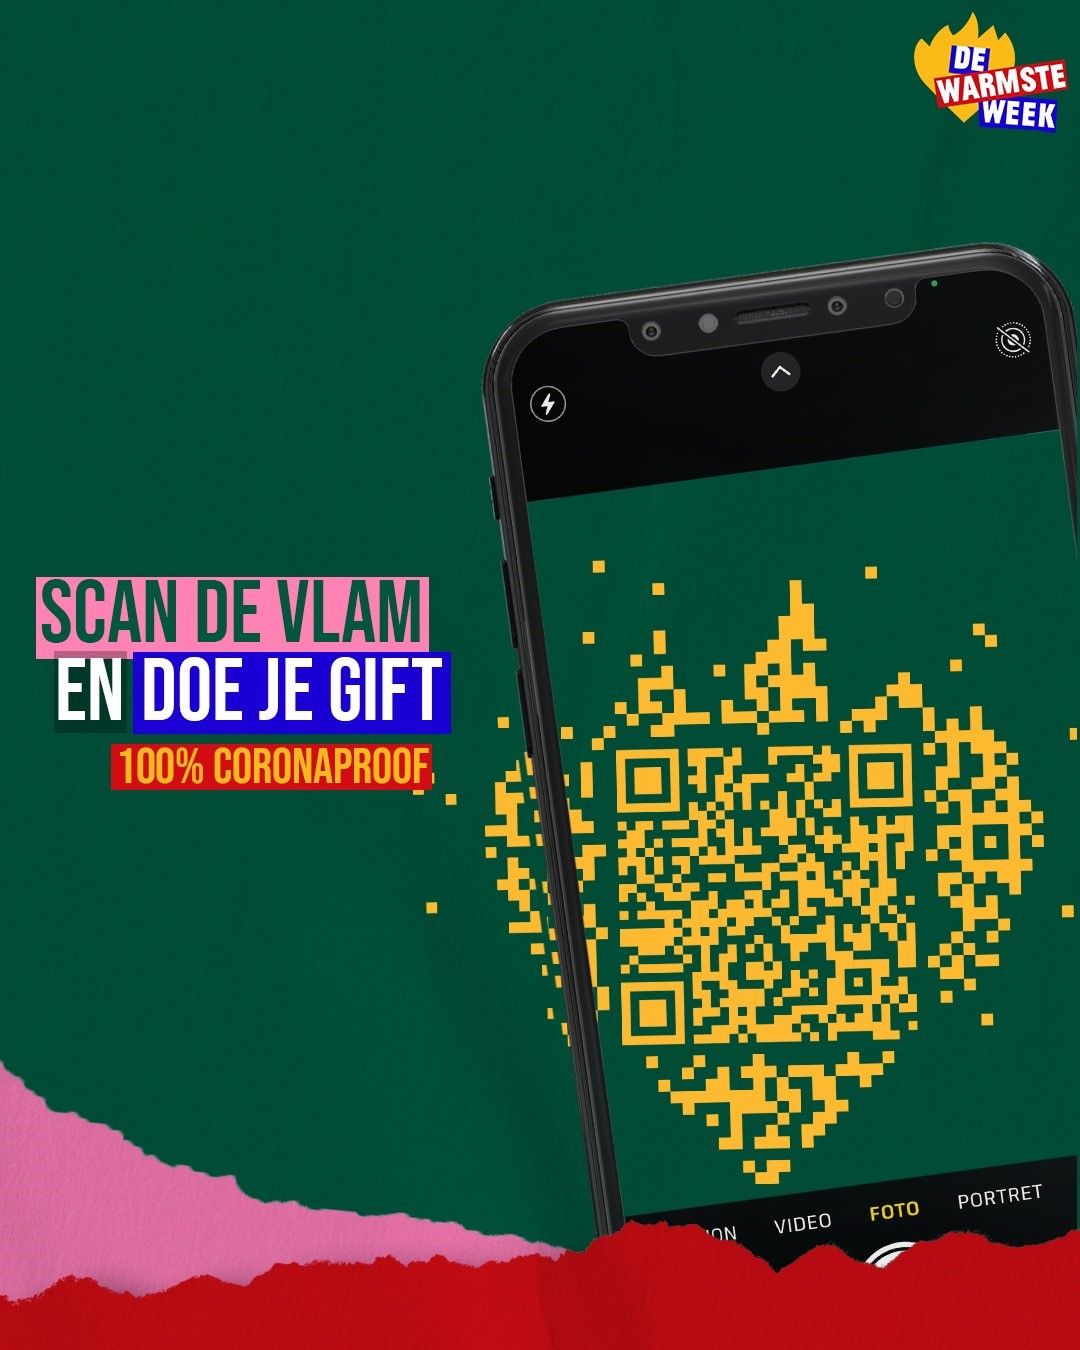 The poster (in dutch) with the new flame-shaped QR code to support The Warmest Week